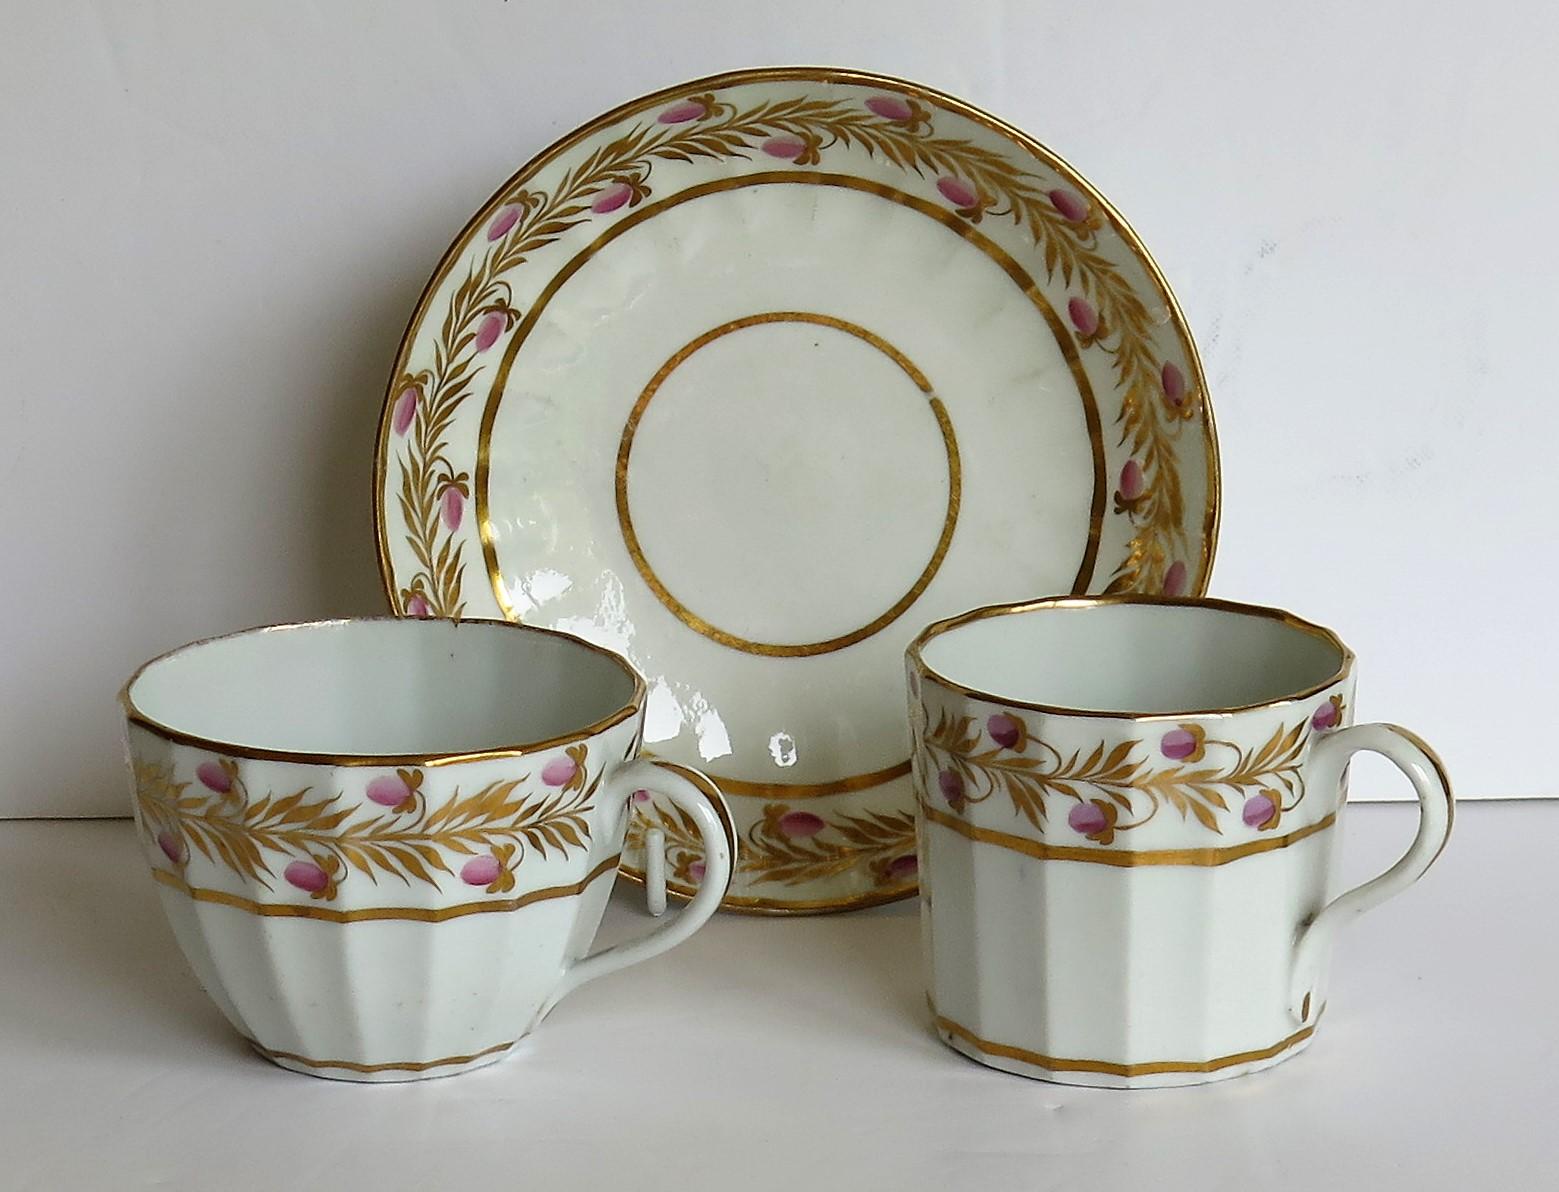 This is an early porcelain trio comprising a vertically fluted coffee can, tea cup and saucer, all in a hand painted and gilded pattern, which we attribute to Coalport, John Rose & Co., Shropshire, England, made late in the 18th century, George